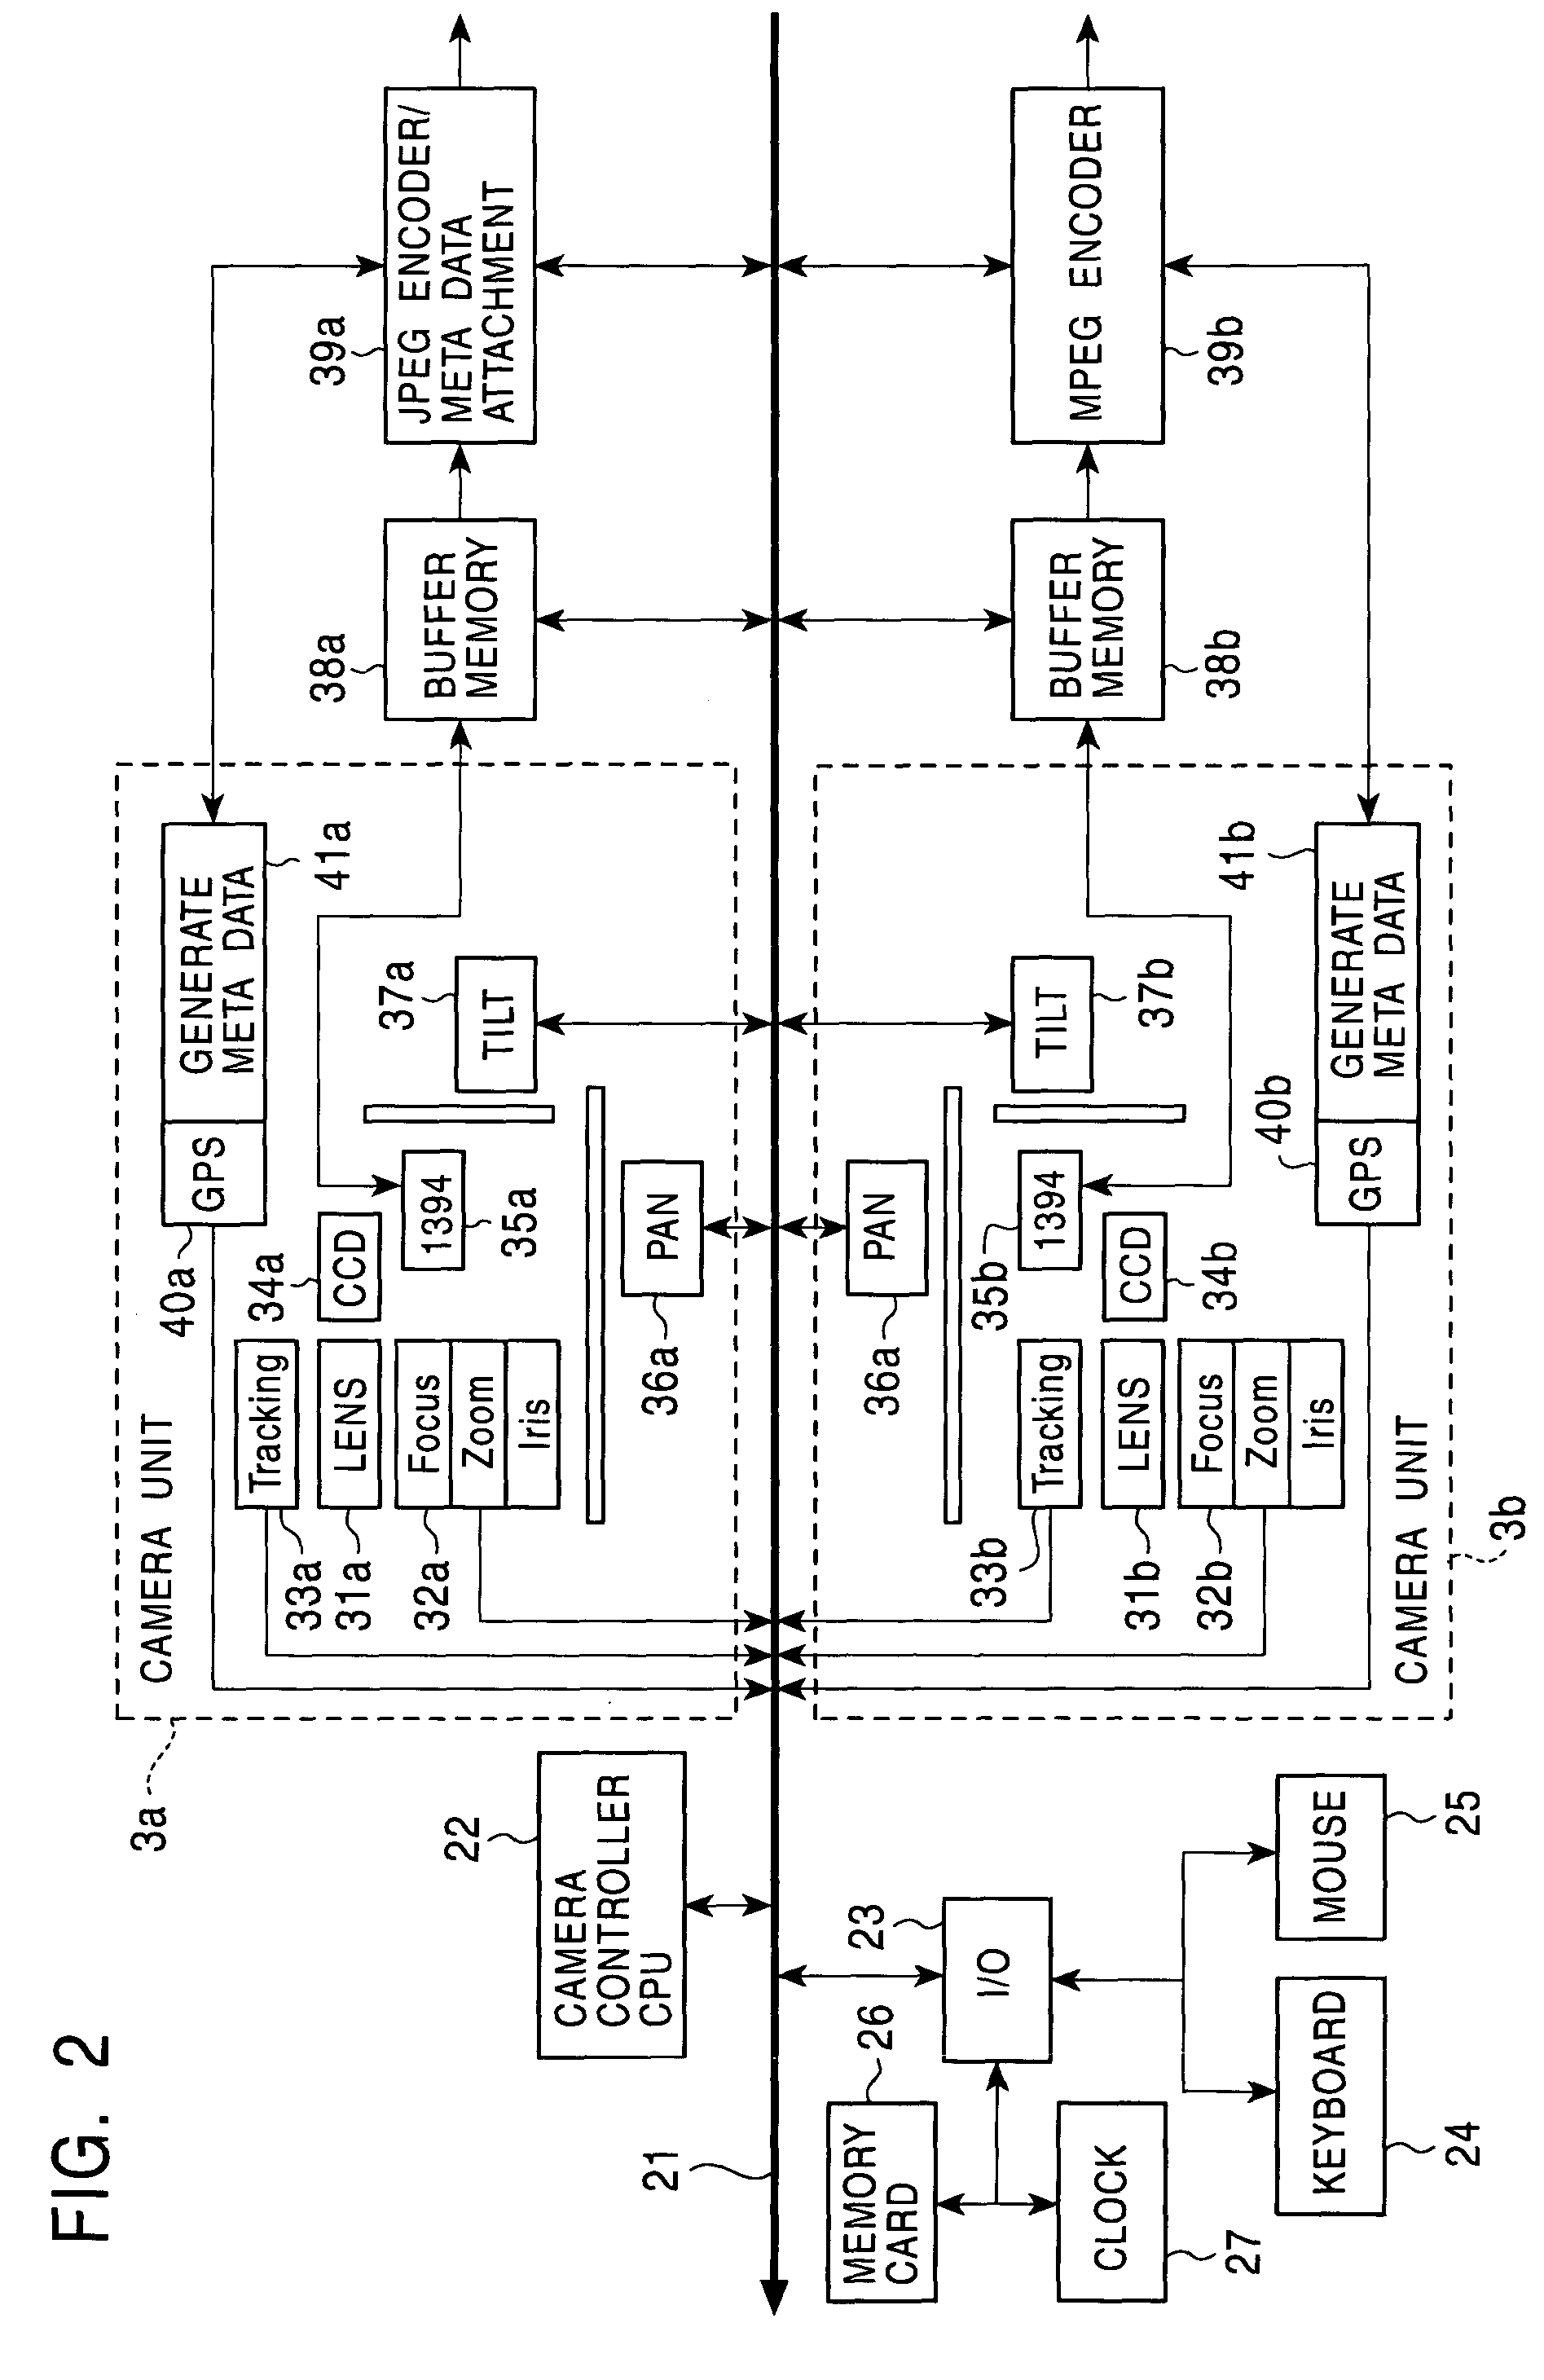 Camera surveillance system and method for displaying multiple zoom levels of an image on different portions of a display